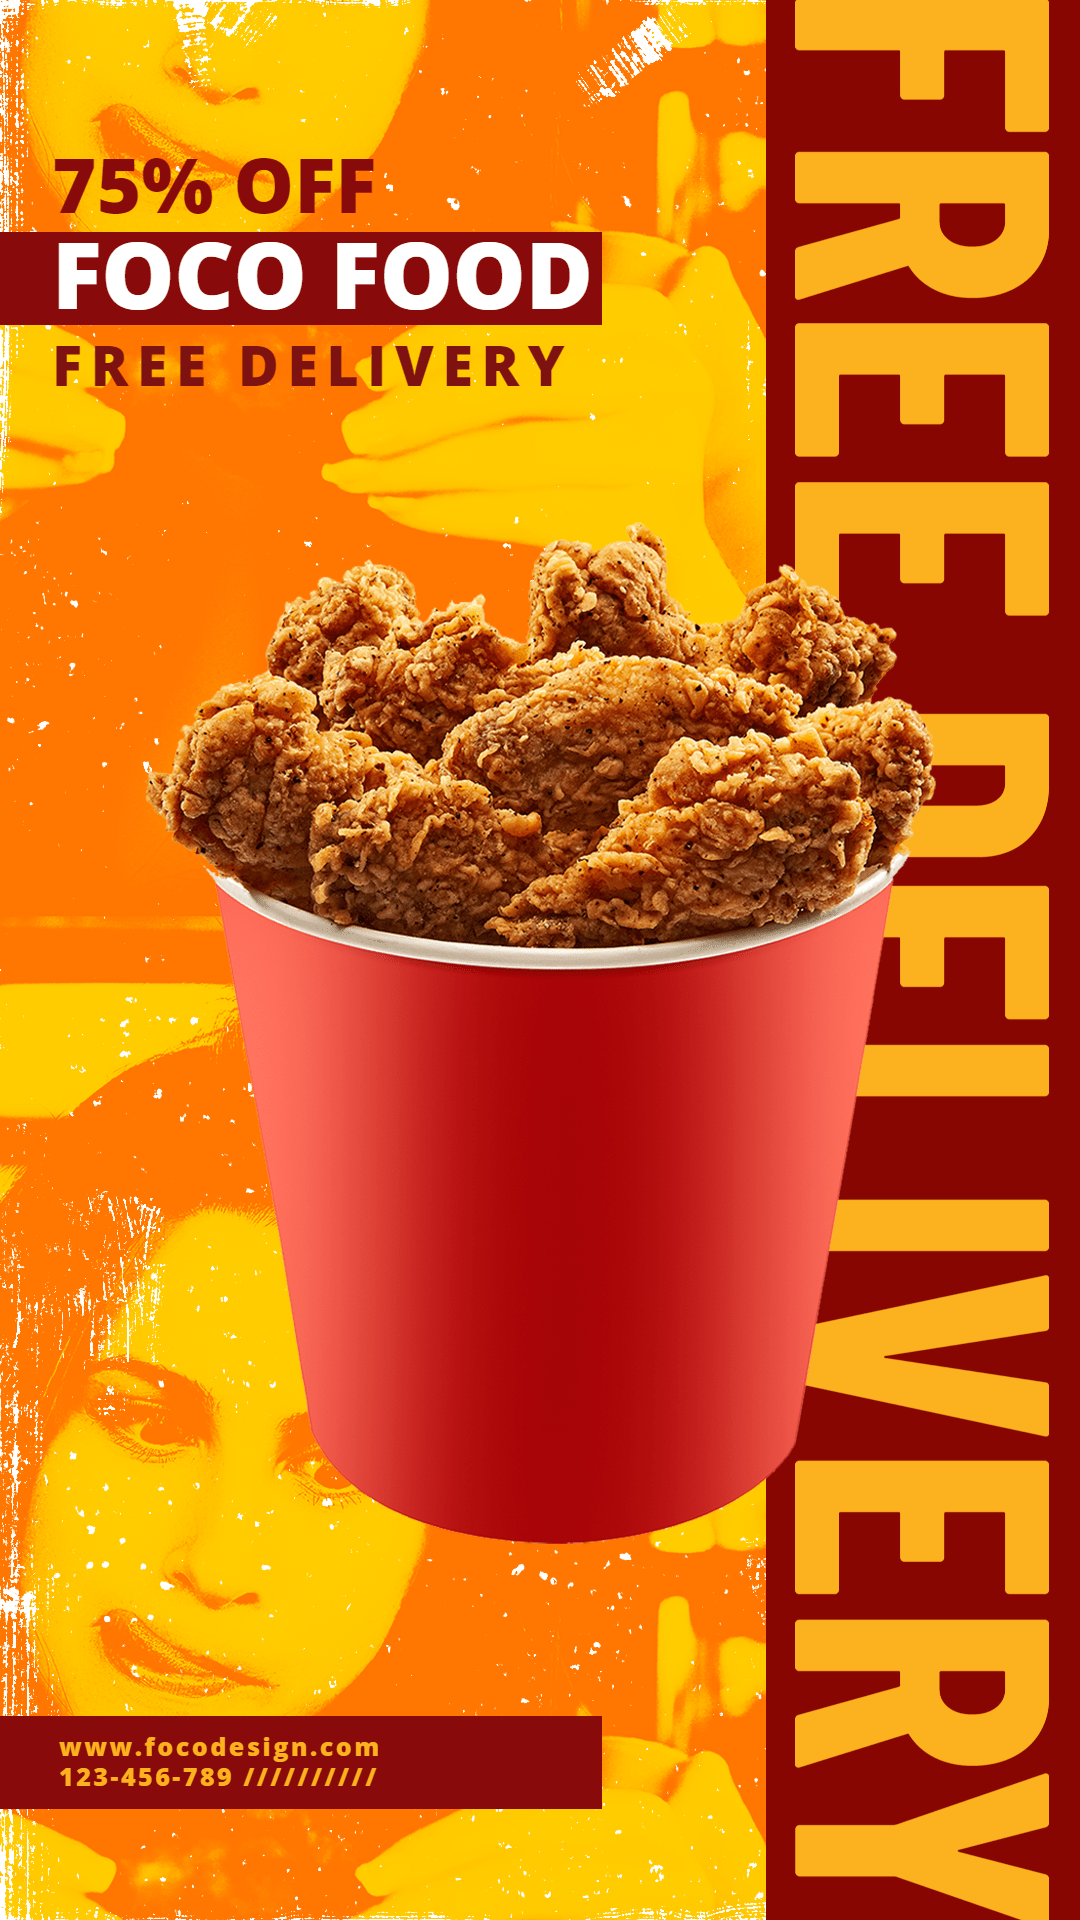 Fried Chicken Fast Food Free Delivery Discount Promo Print Advertising Ecommerce Story